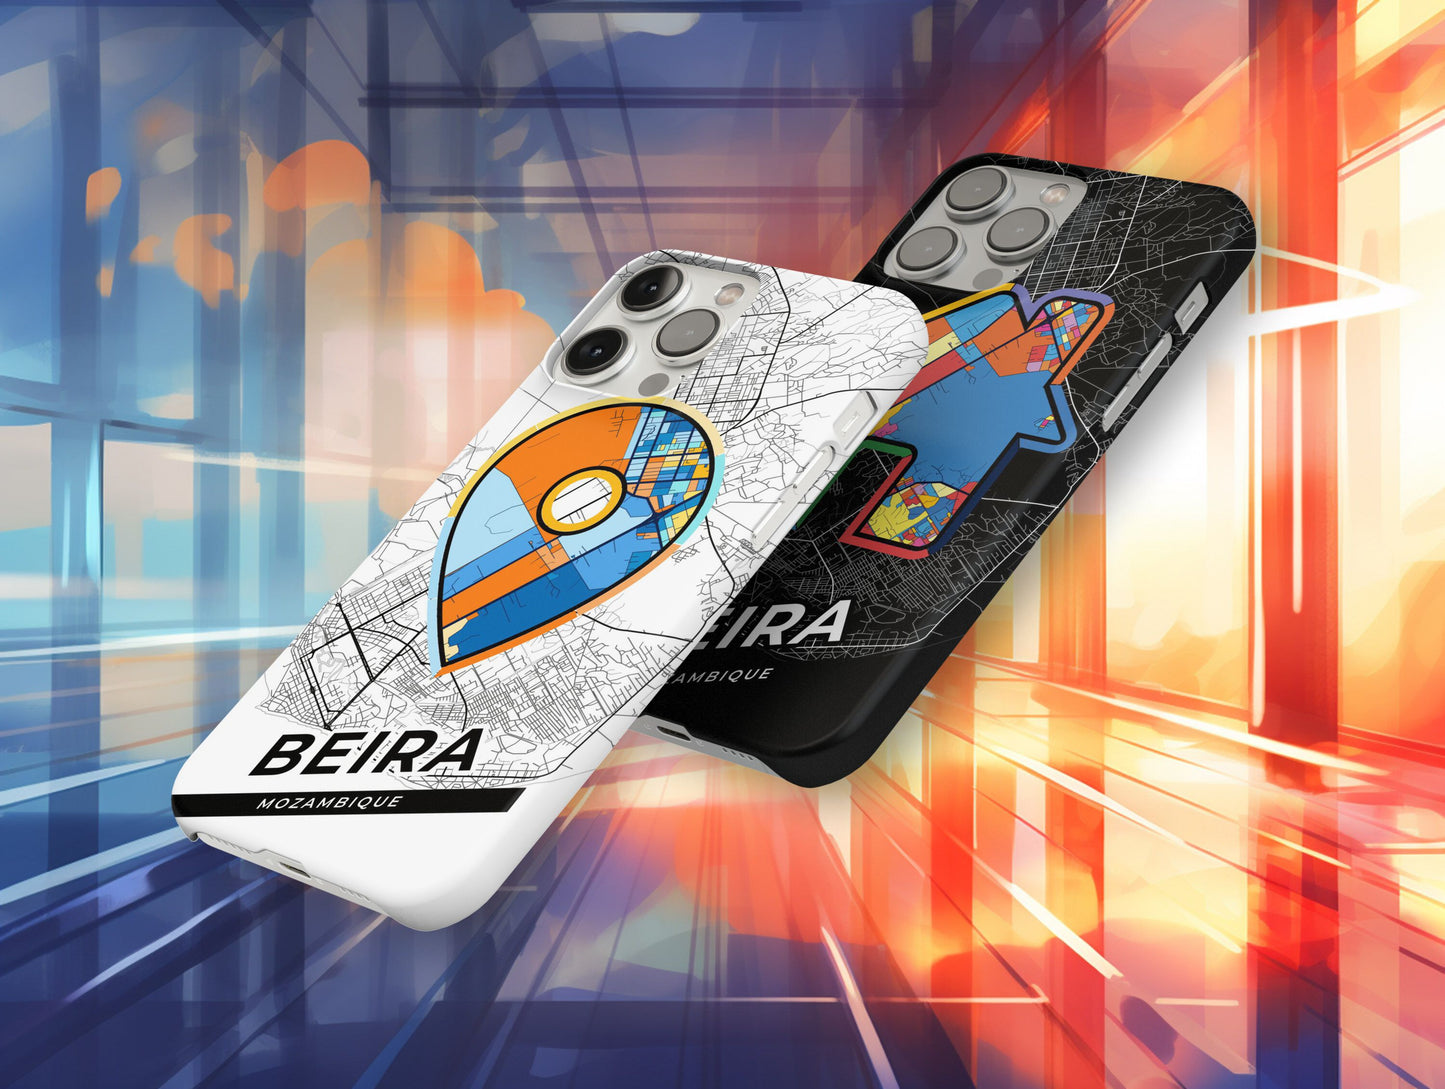 Beira Mozambique slim phone case with colorful icon. Birthday, wedding or housewarming gift. Couple match cases.